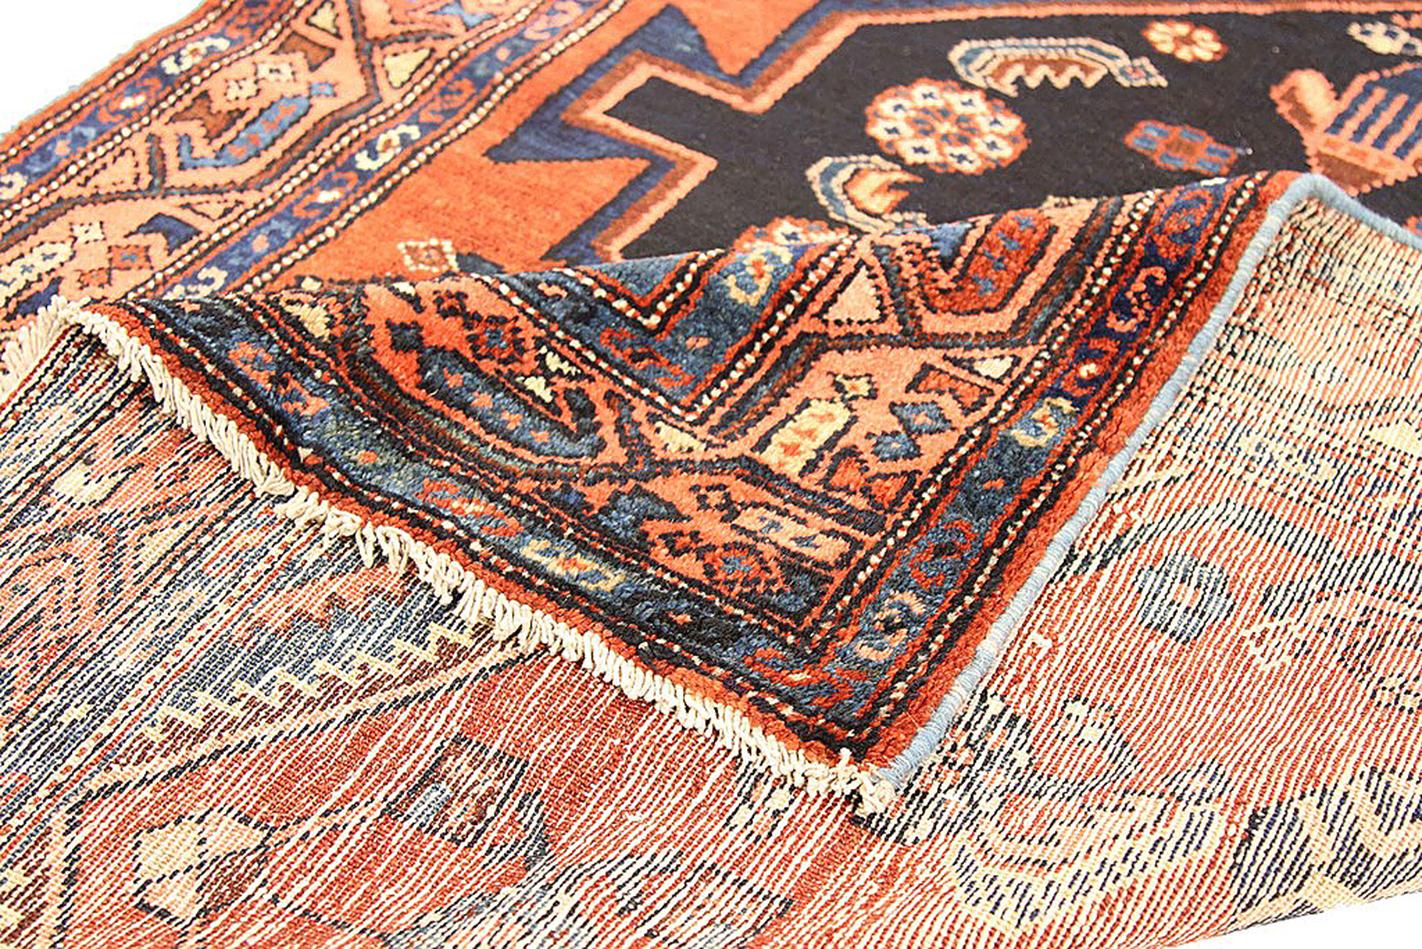 Islamic 1930 Antique Persian Malayer Runner Rug with 3 Large Medallions on Center Field For Sale